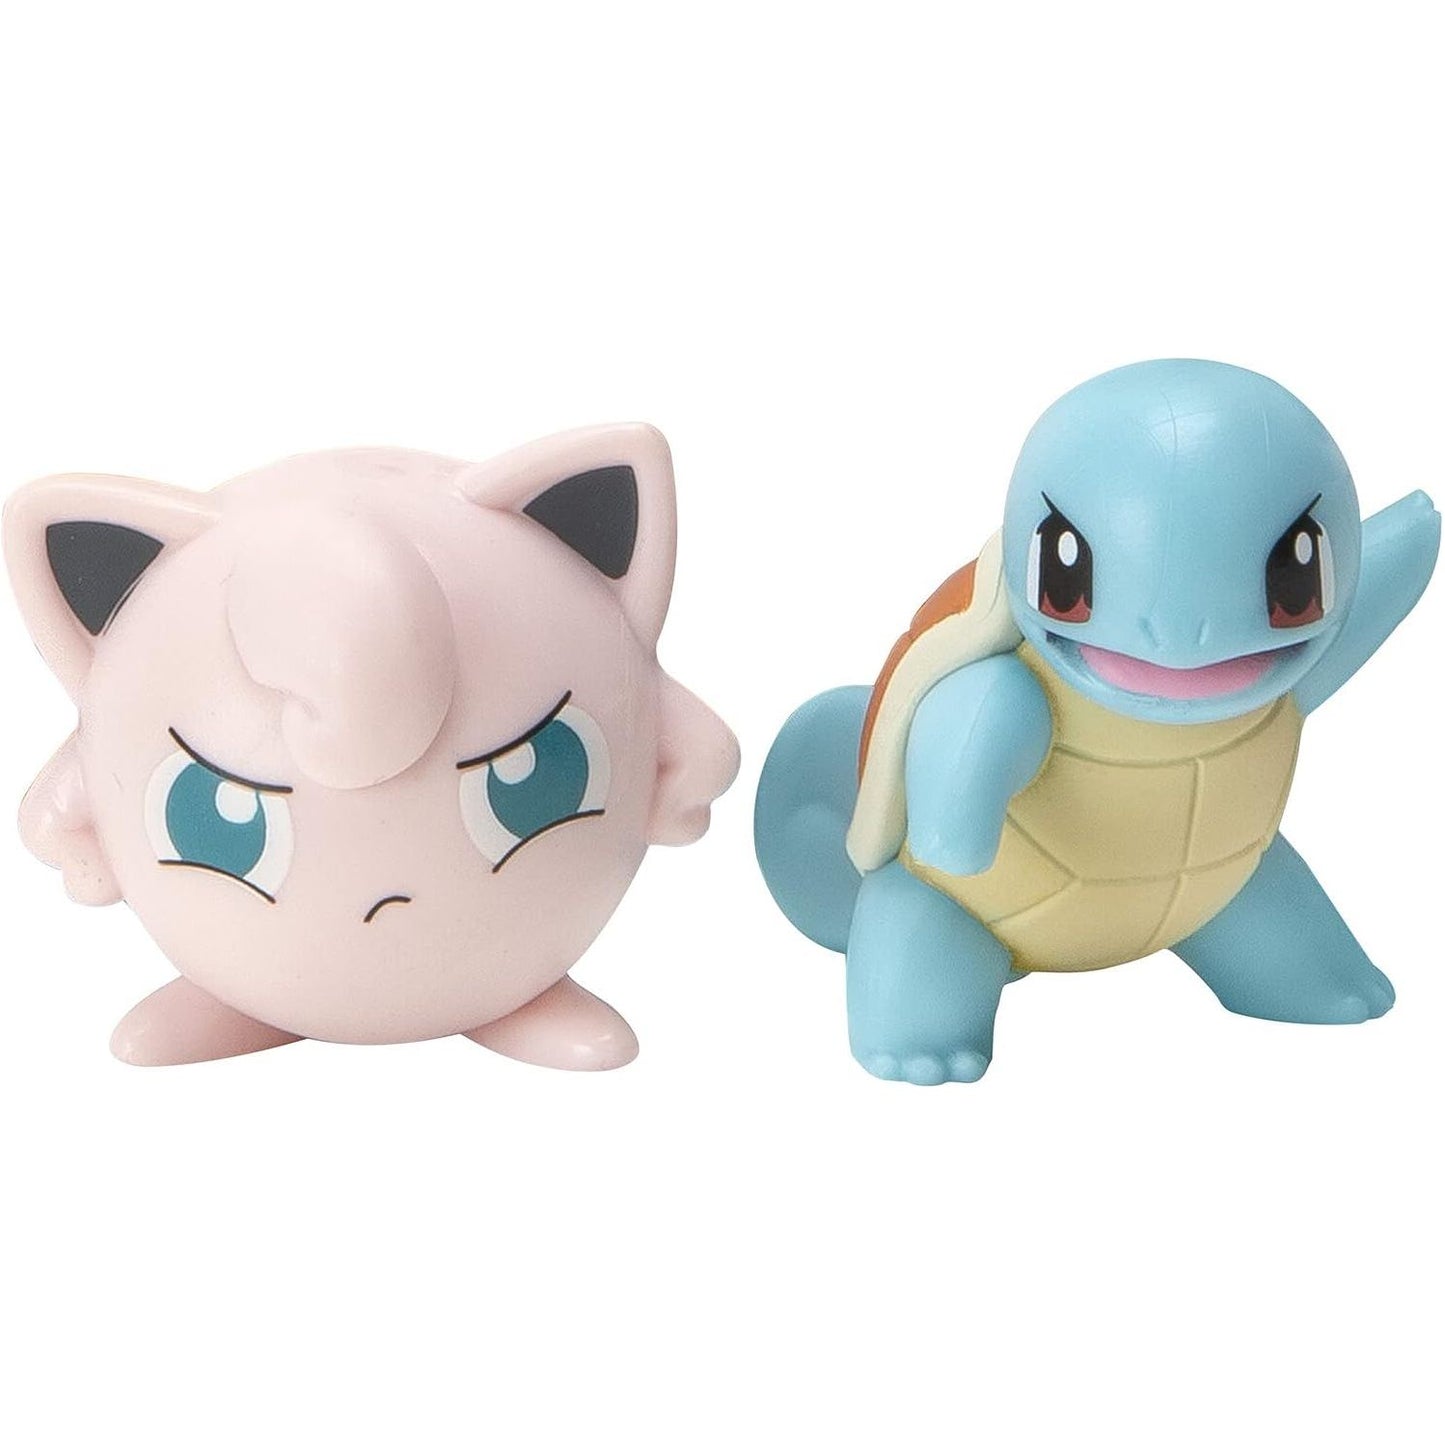 Pokémon Surprise Attack Game Play Set - Squirtle and Jigglypuff